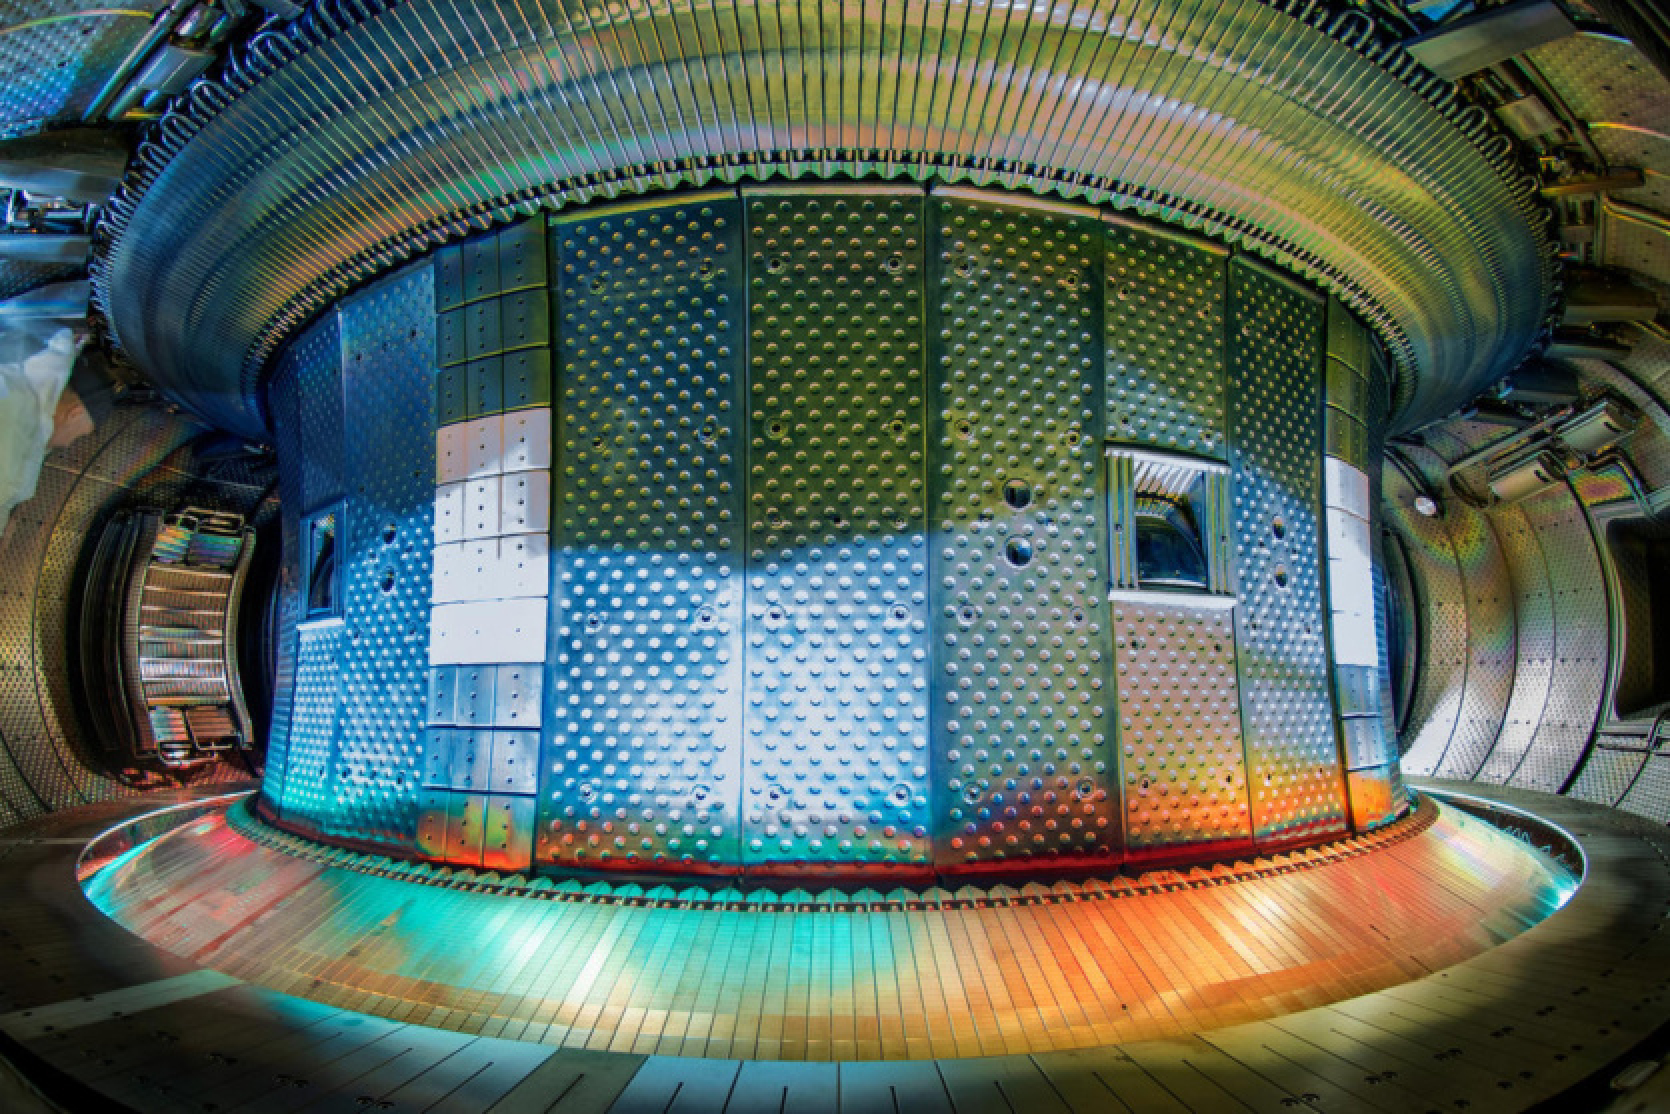 Fusion record: 50 million °C for 6 minutes at the WEST reactor maintained by French and American scientists